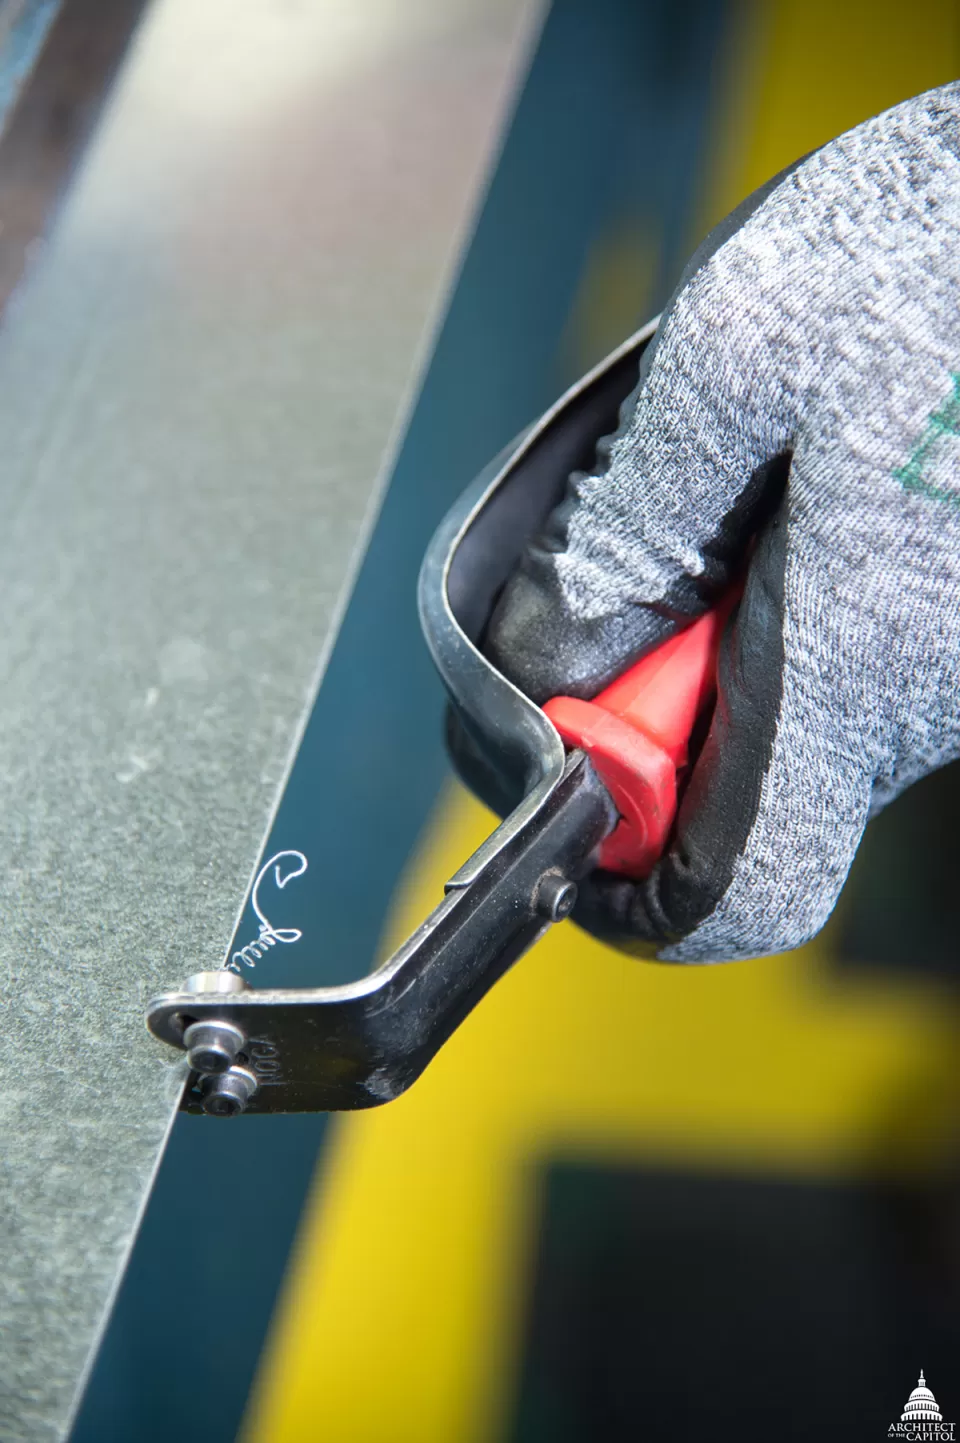 The deburring tool used to remove sharp edges from sheet metal.